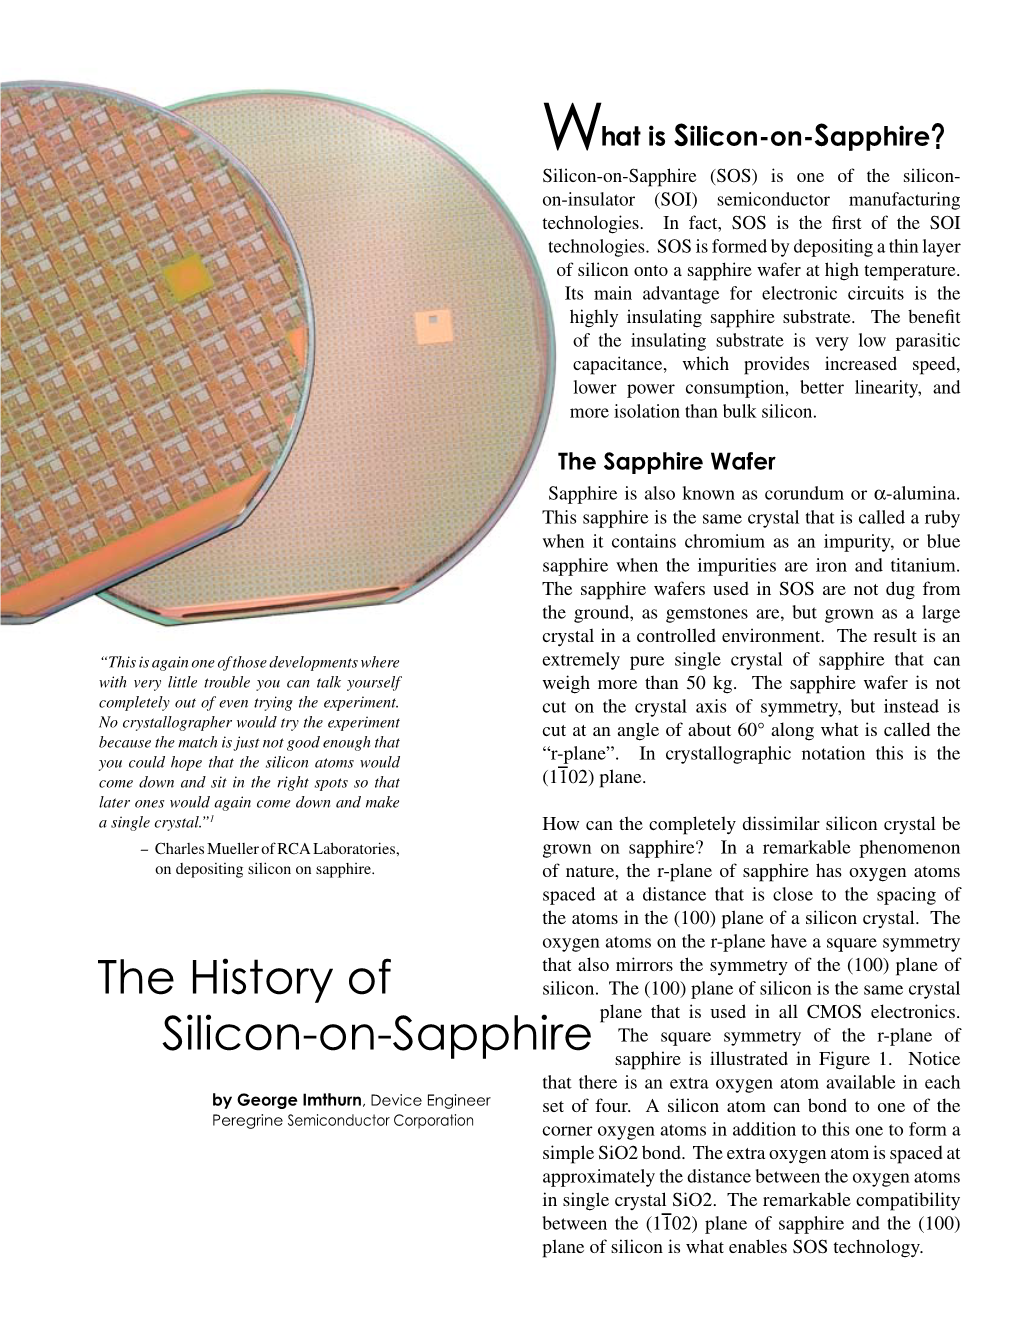 The History of Silicon-On-Sapphire